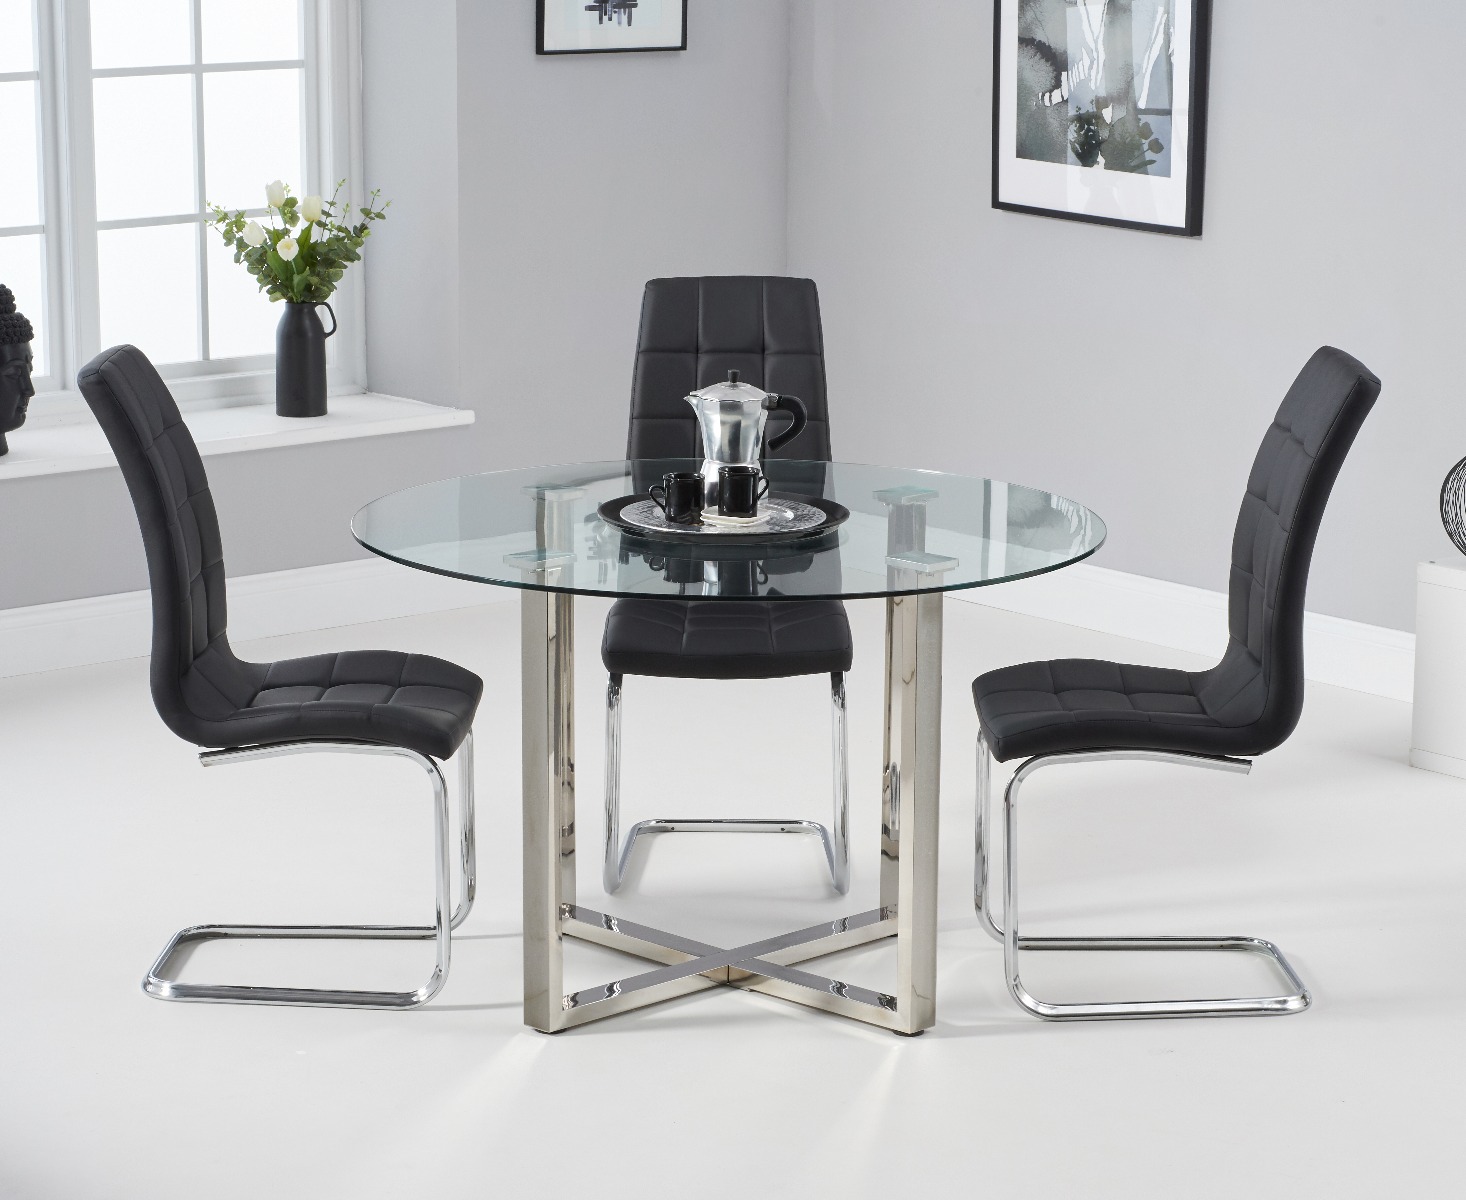 Photo 2 of Vaso 120cm round glass dining table with 4 white vigo dining chairs